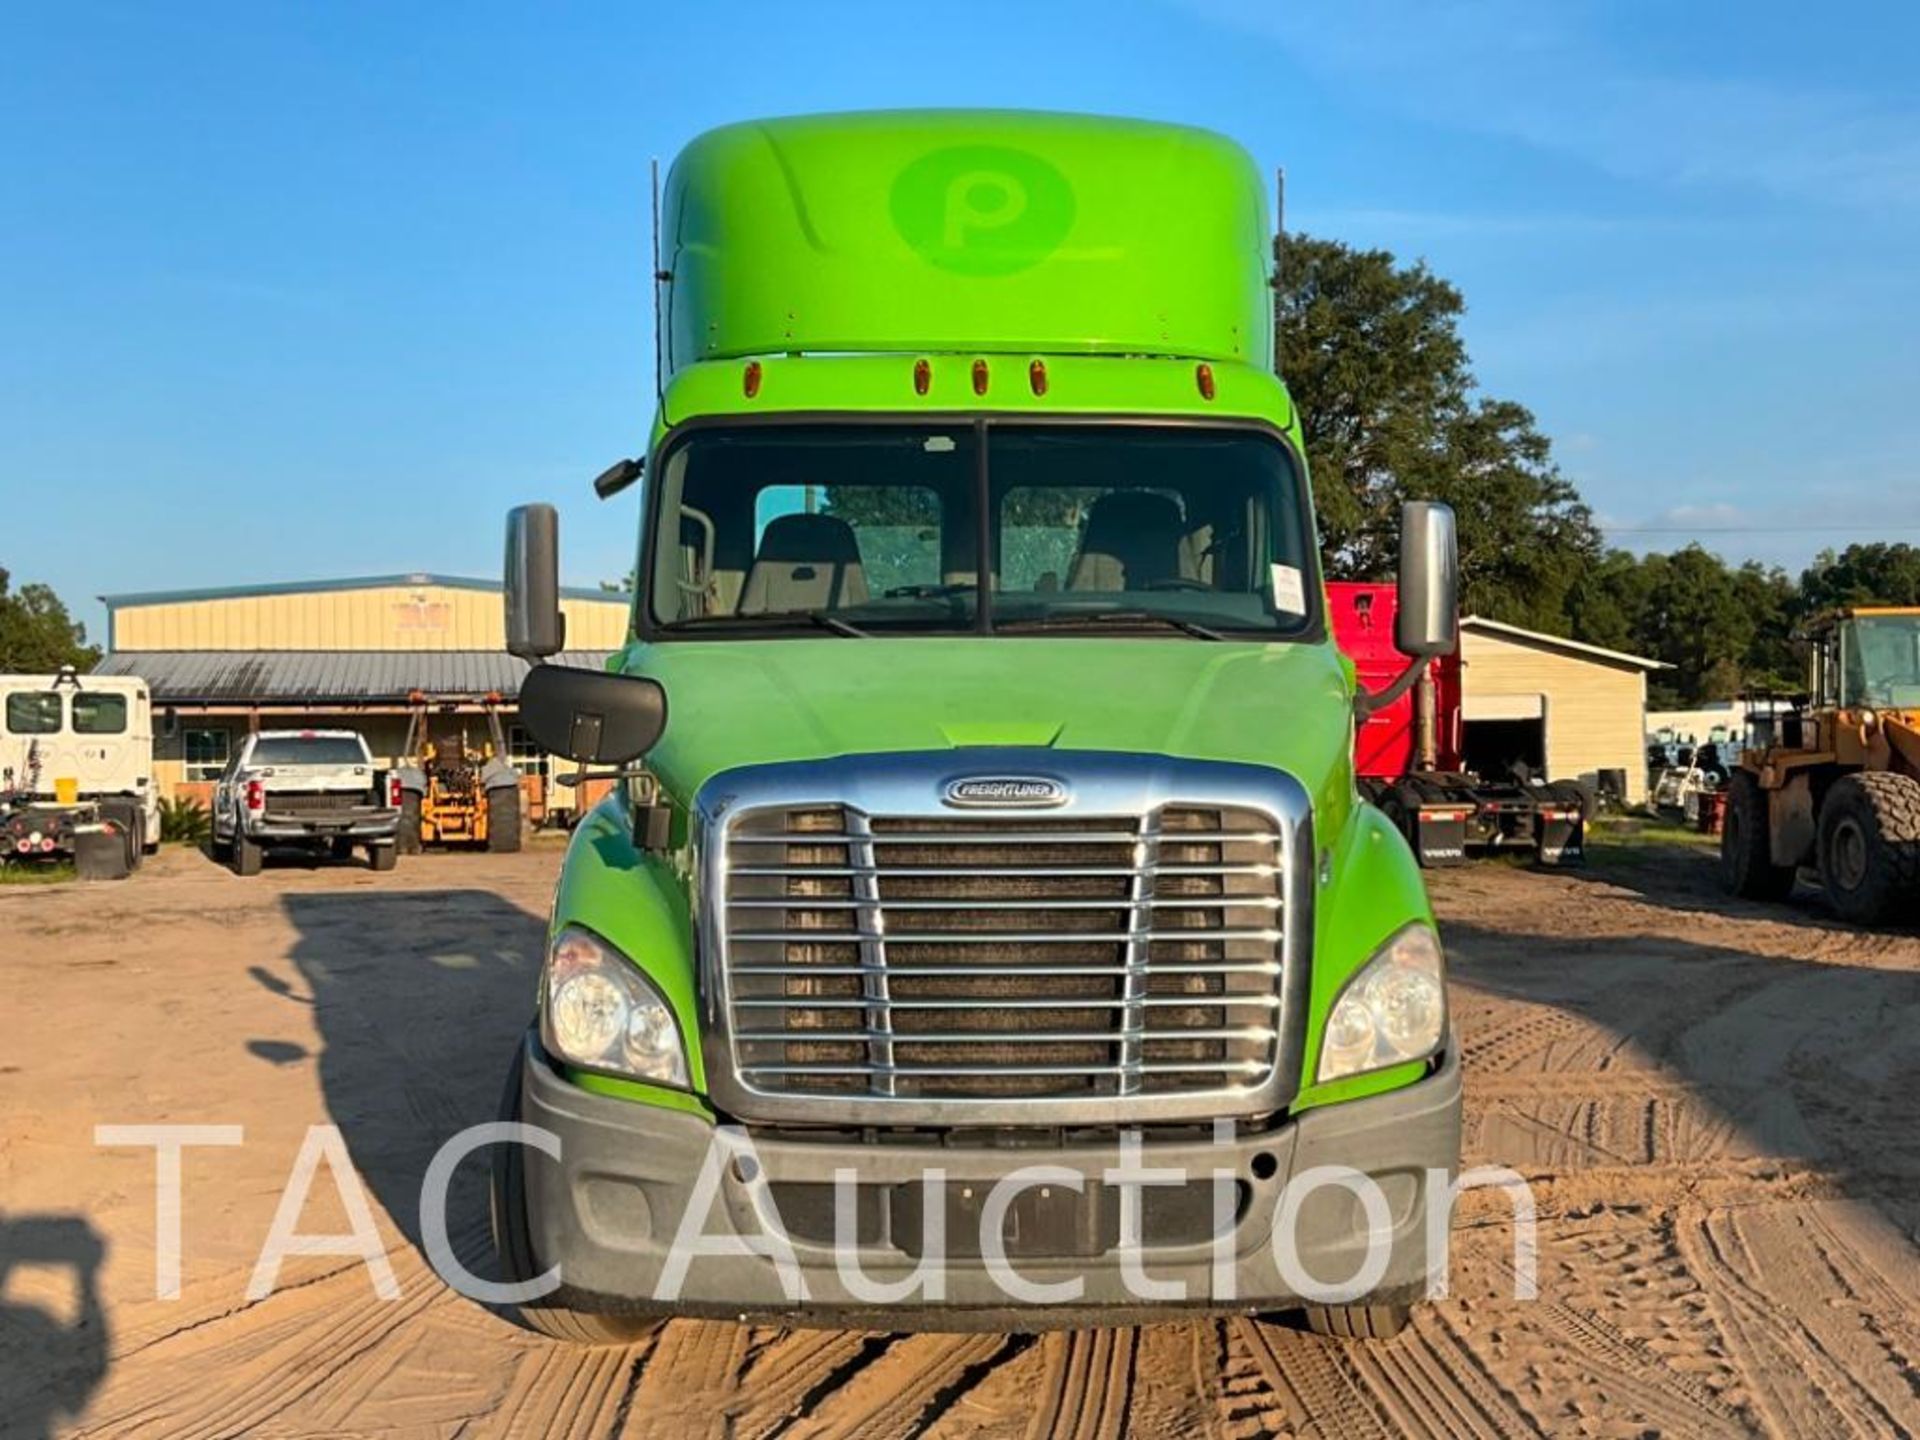 2017 Freightliner Cascadia Day Cab - Image 17 of 114